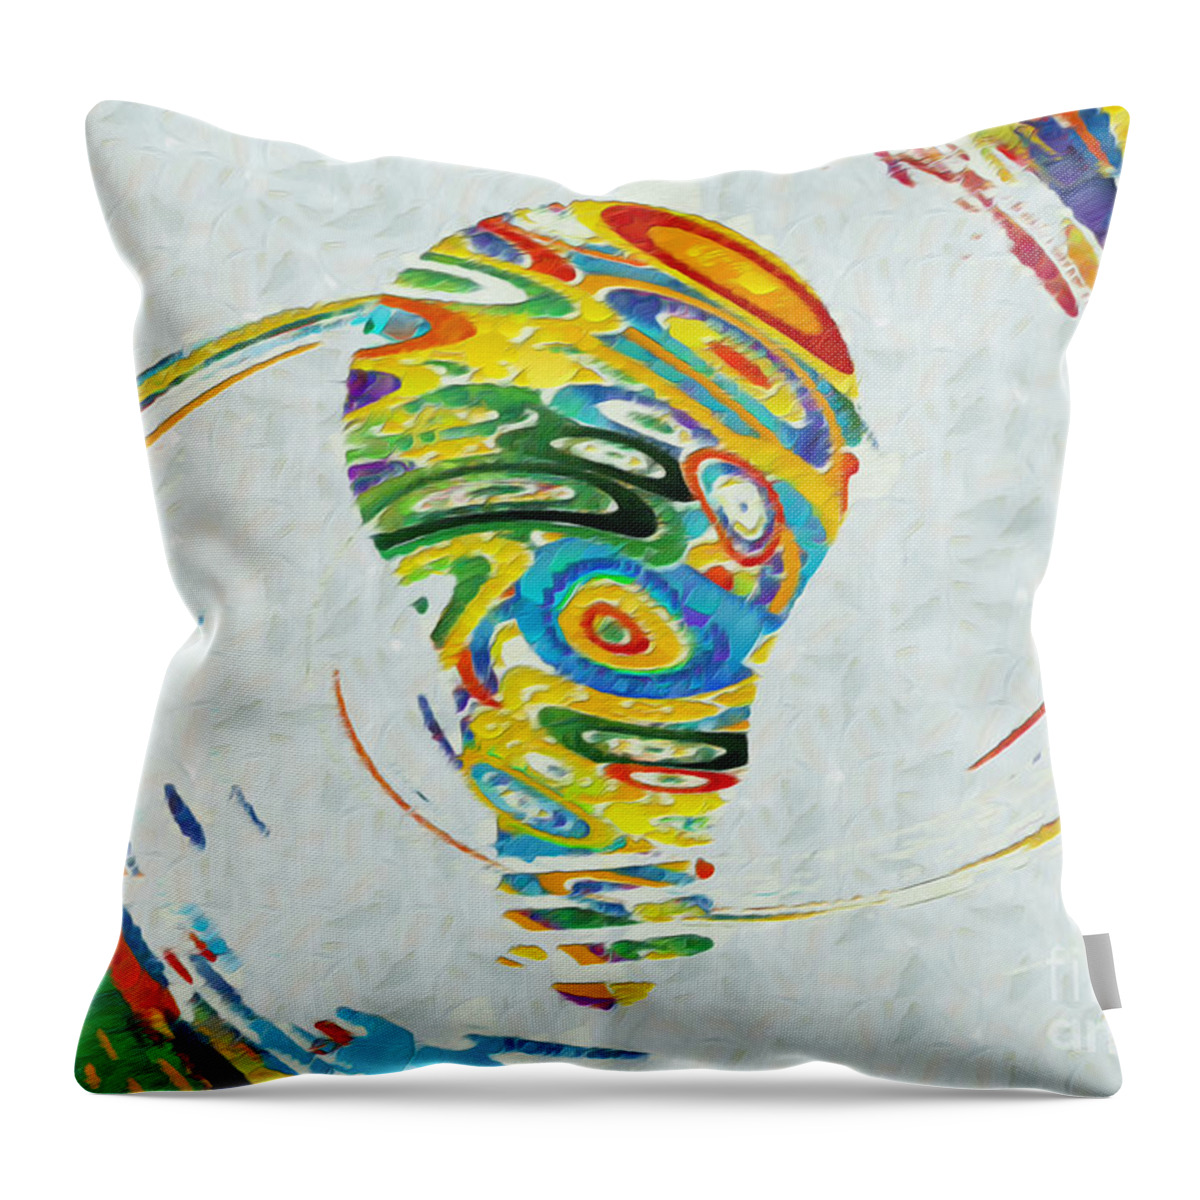 Colorful Ideas Throw Pillow featuring the photograph Colorful Ideas by Stefano Senise